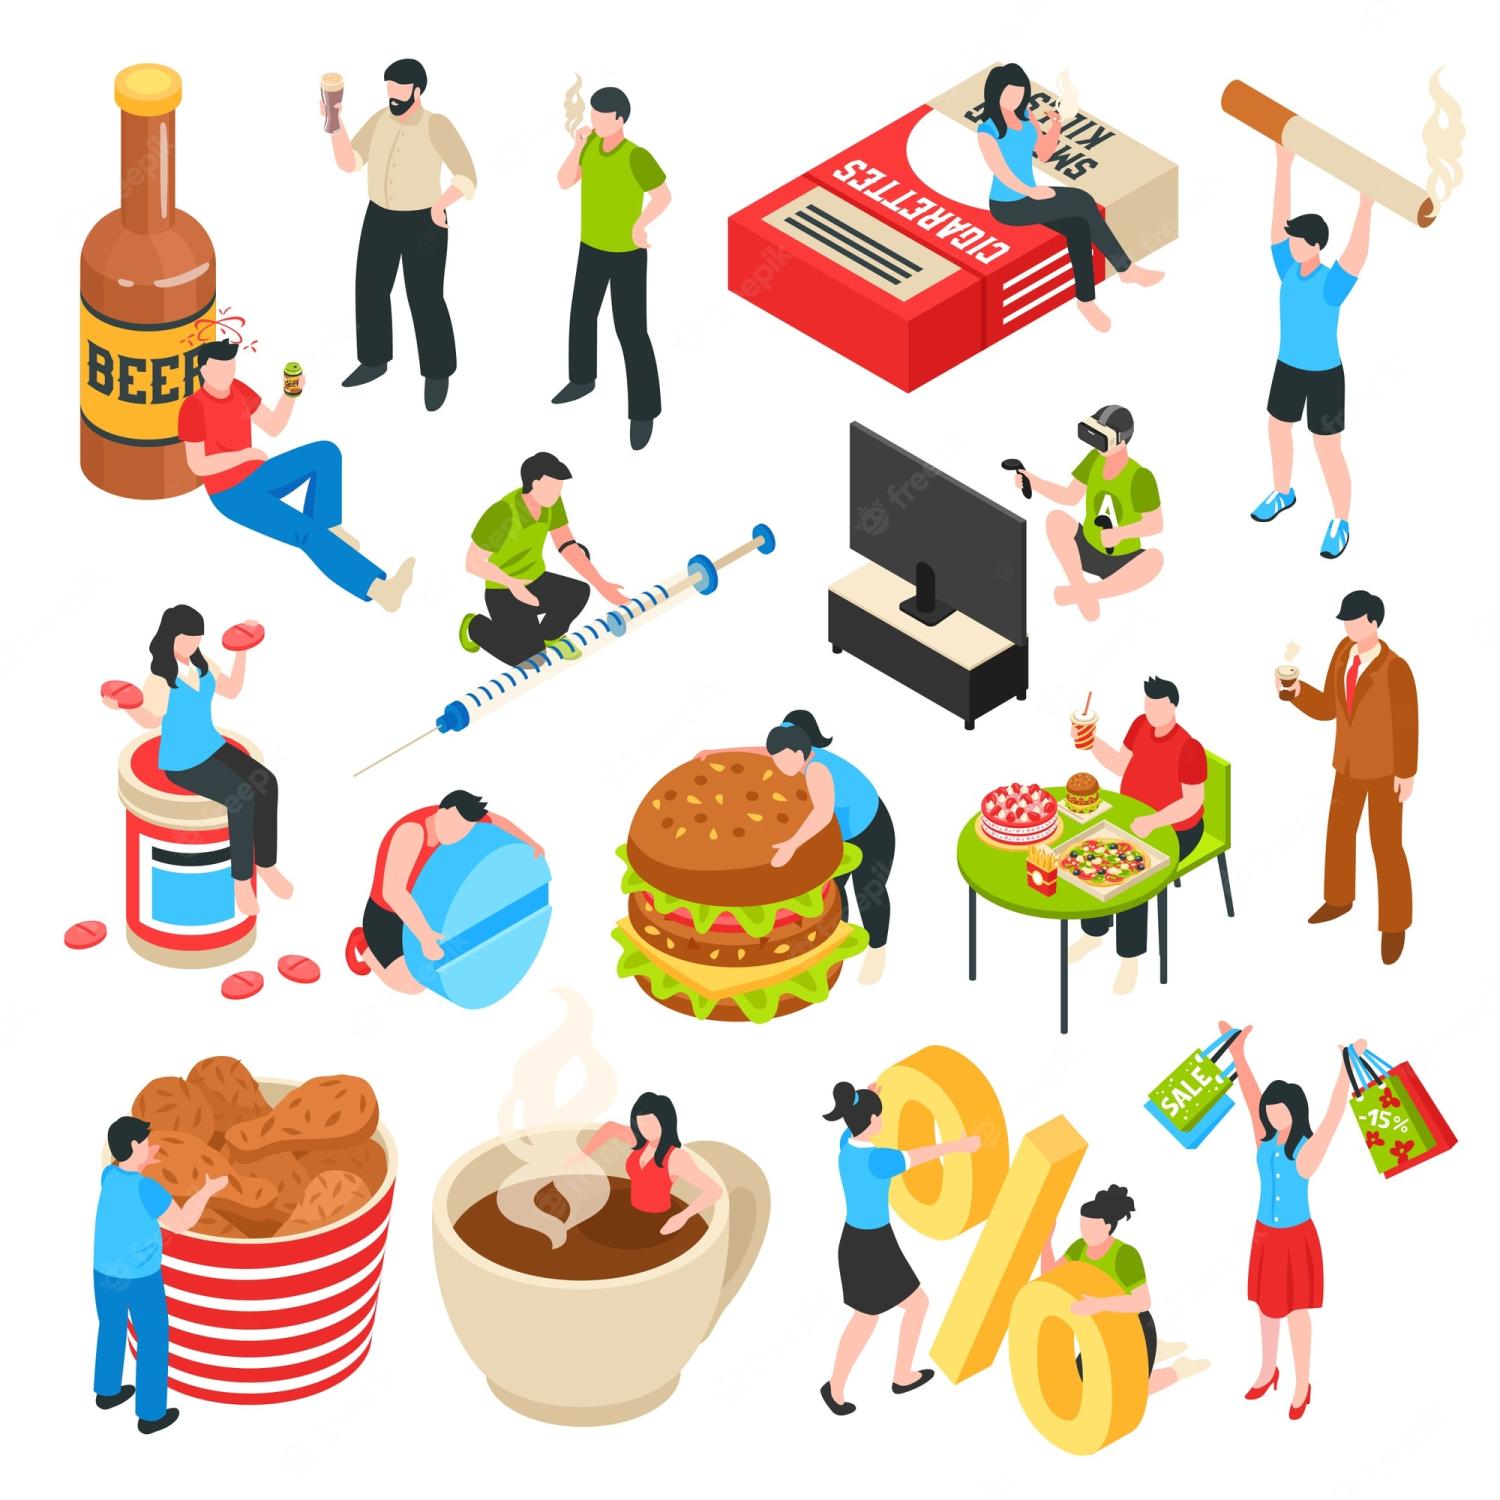 https://cdn.noron.vn/2022/06/26/human-characters-with-bad-habits-alcohol-drug-shopaholism-fast-food-isometric-icons-set98292-7891-1656218535.jpg